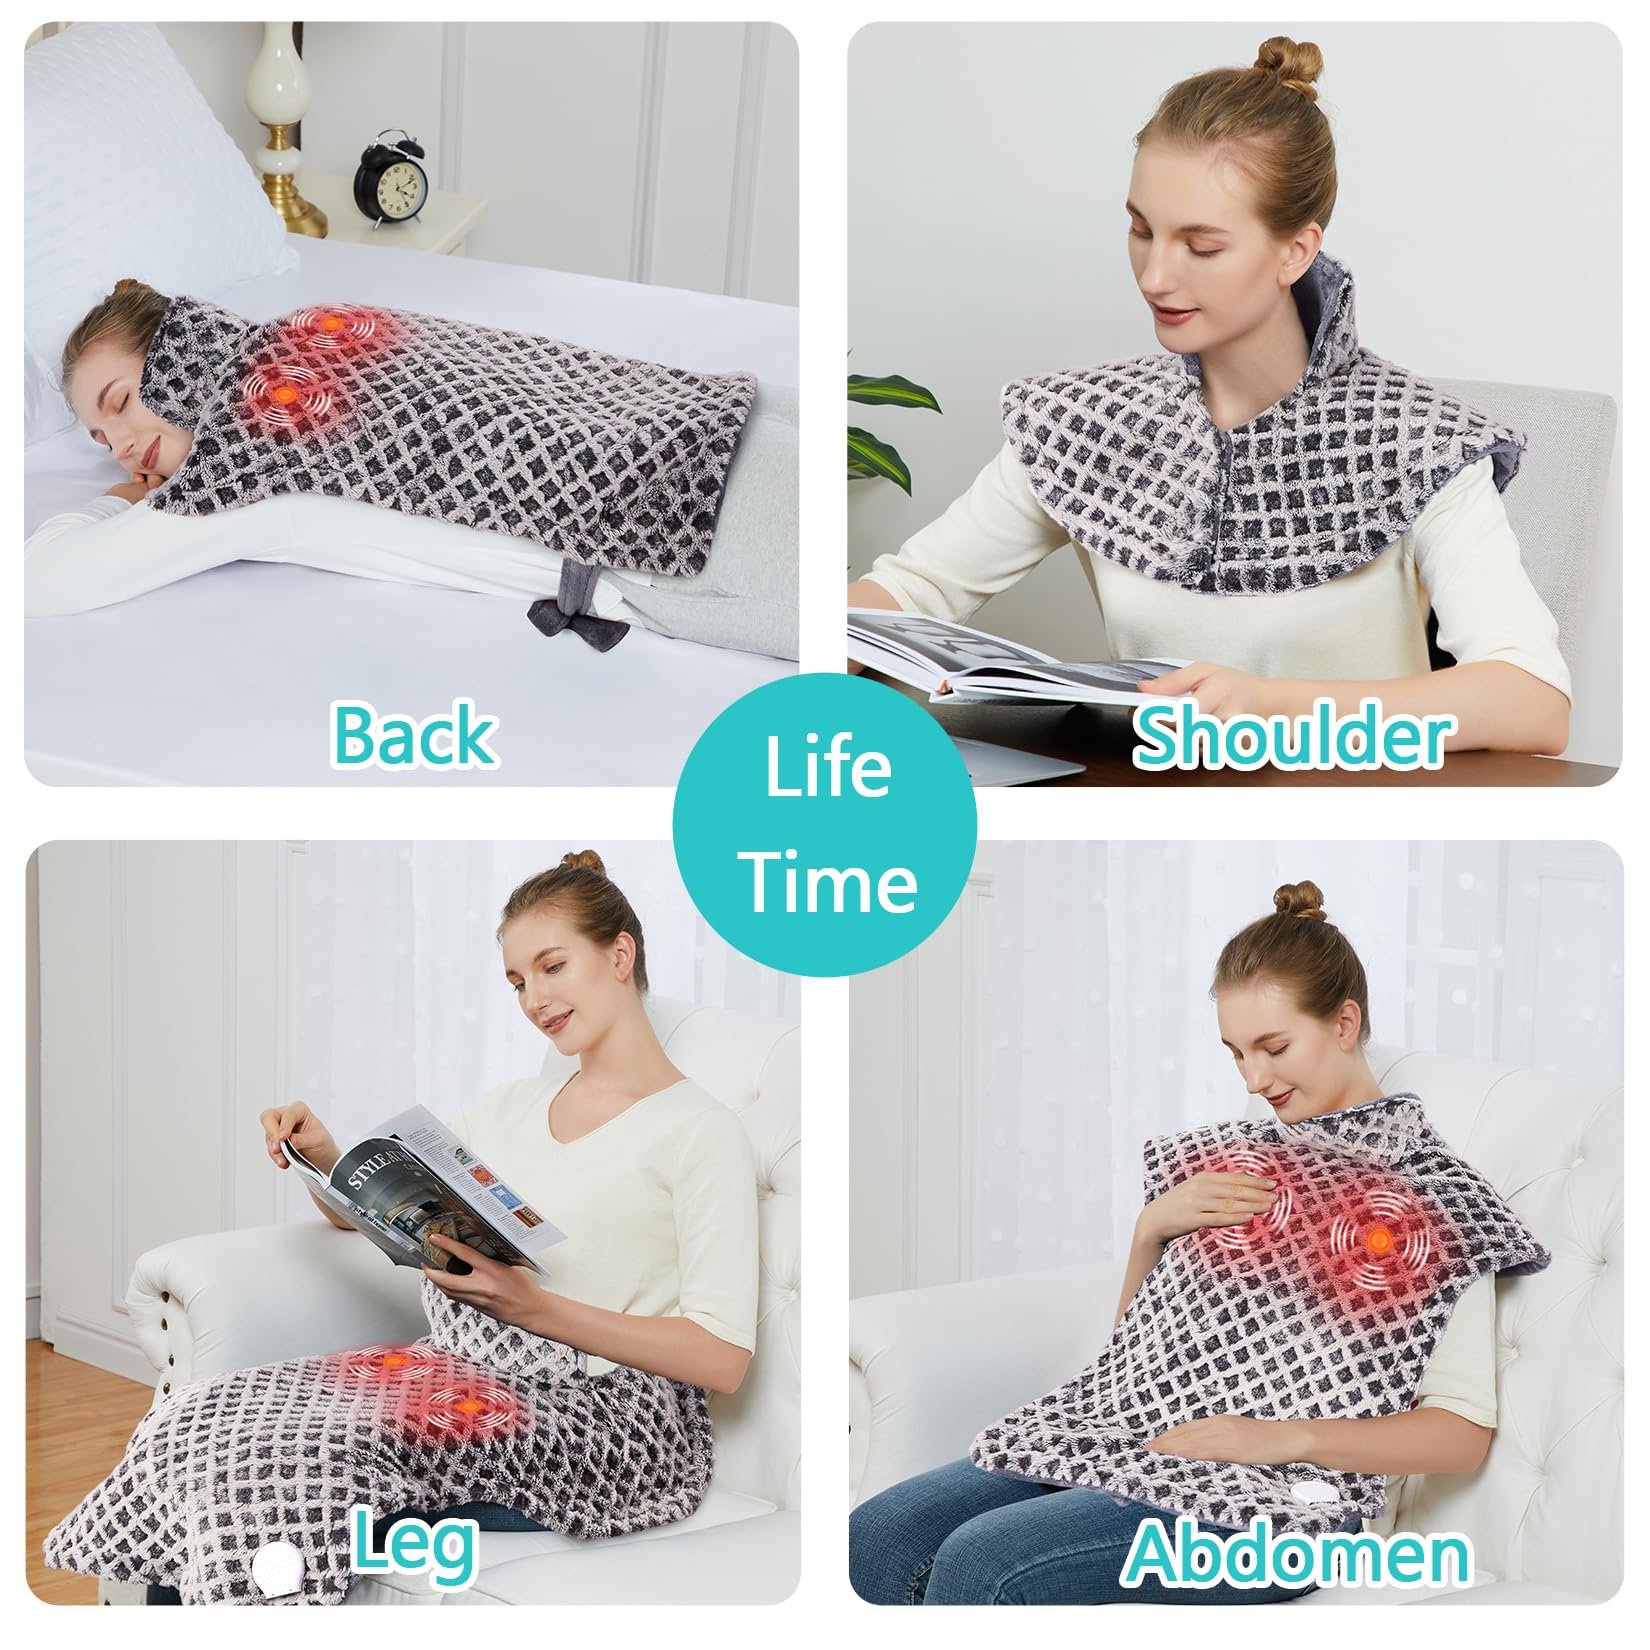 CAROMIO Massaging Heating Pad for Back Pain Relief, Neck and Shoulders Electric Heating Pads Large Size, Full Body Back Heat Pad with Auto Shut Off, 3 Heating Levels & 3 Massage Modes (Grey, 35